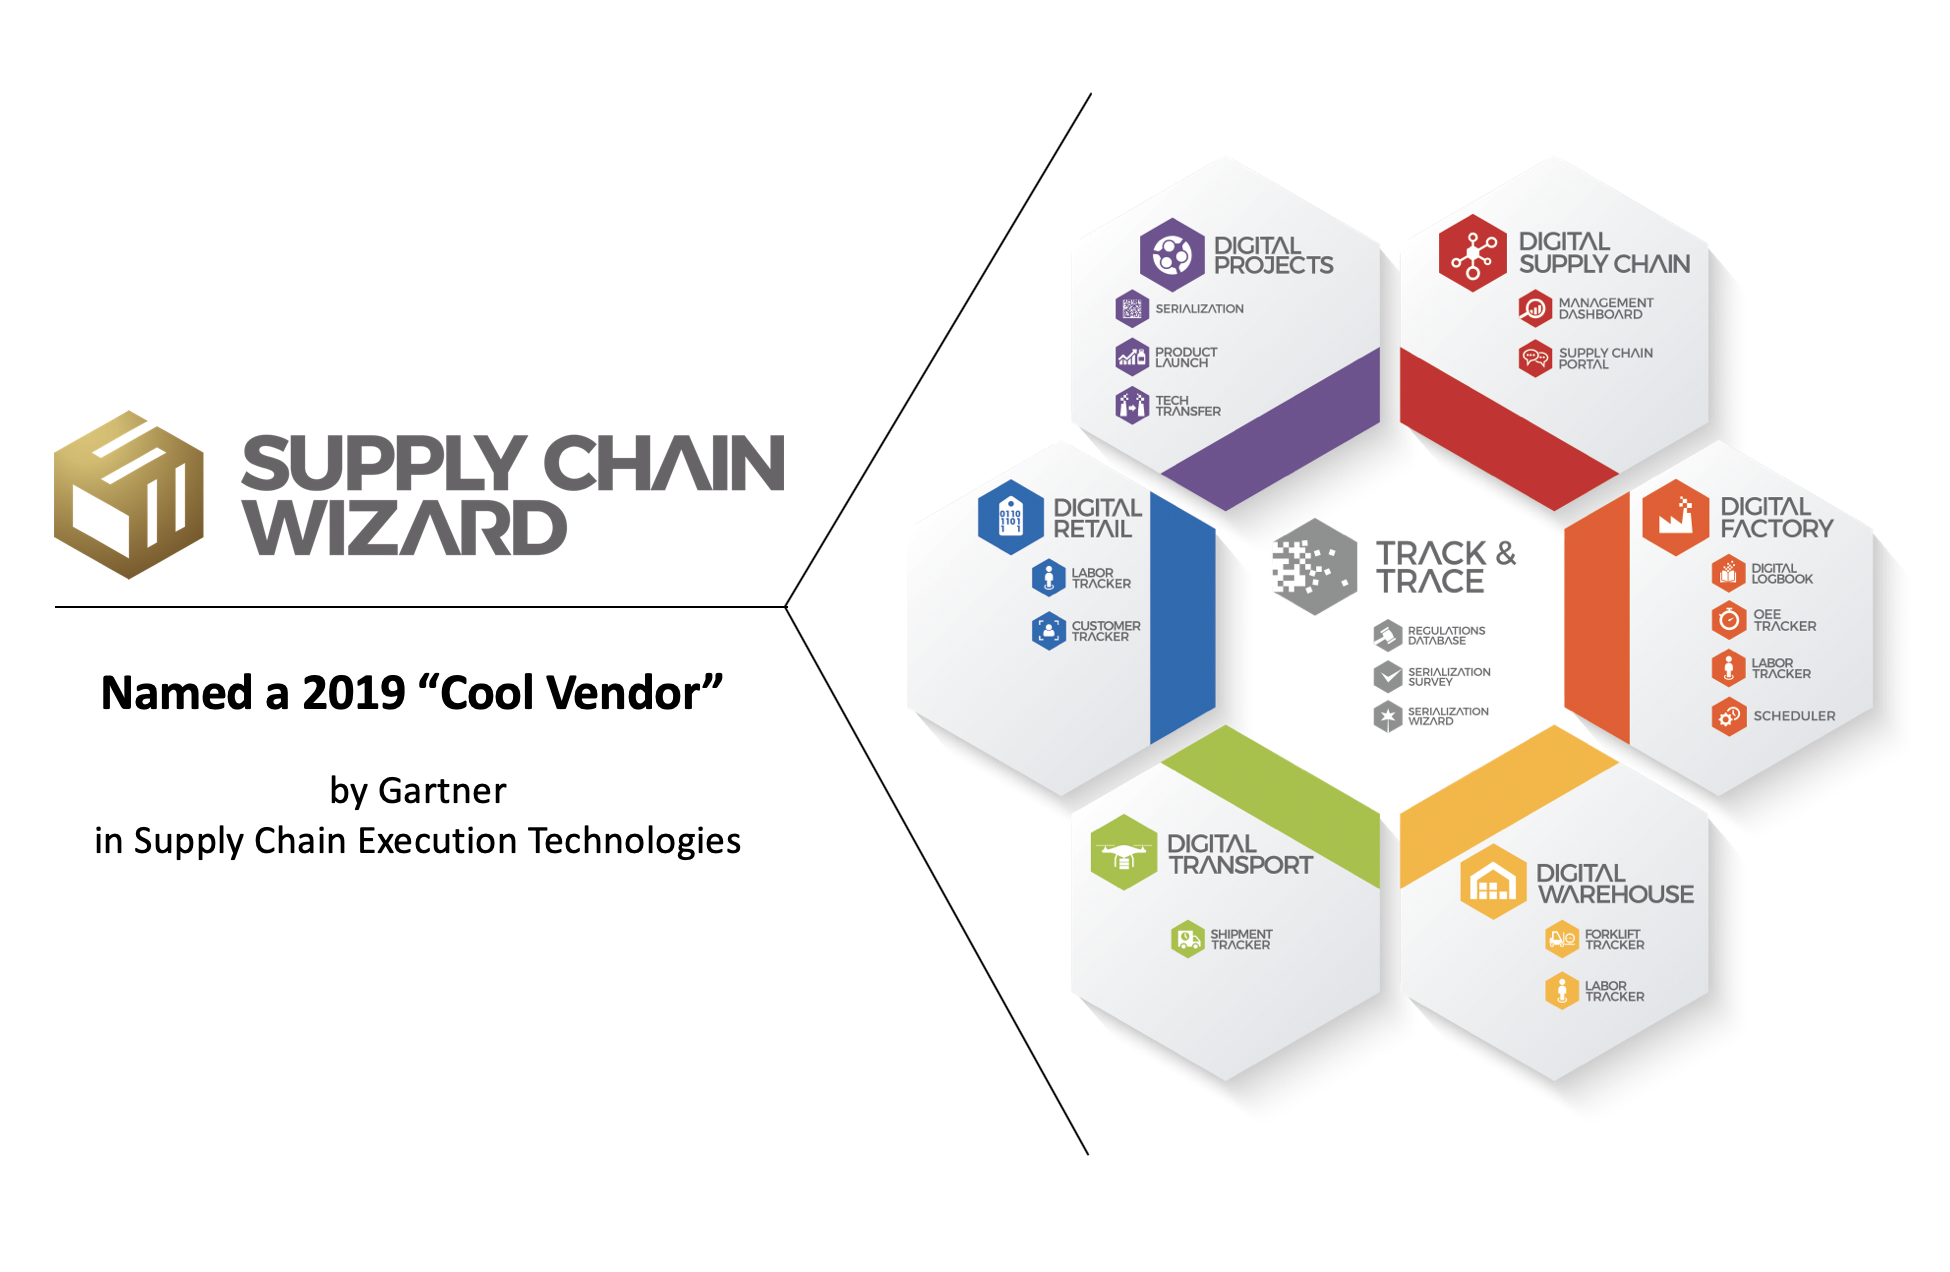 Supply Chain Wizard Named a 2019 "Cool Vendor"  in Supply Chain Execution Technologies by Gartner